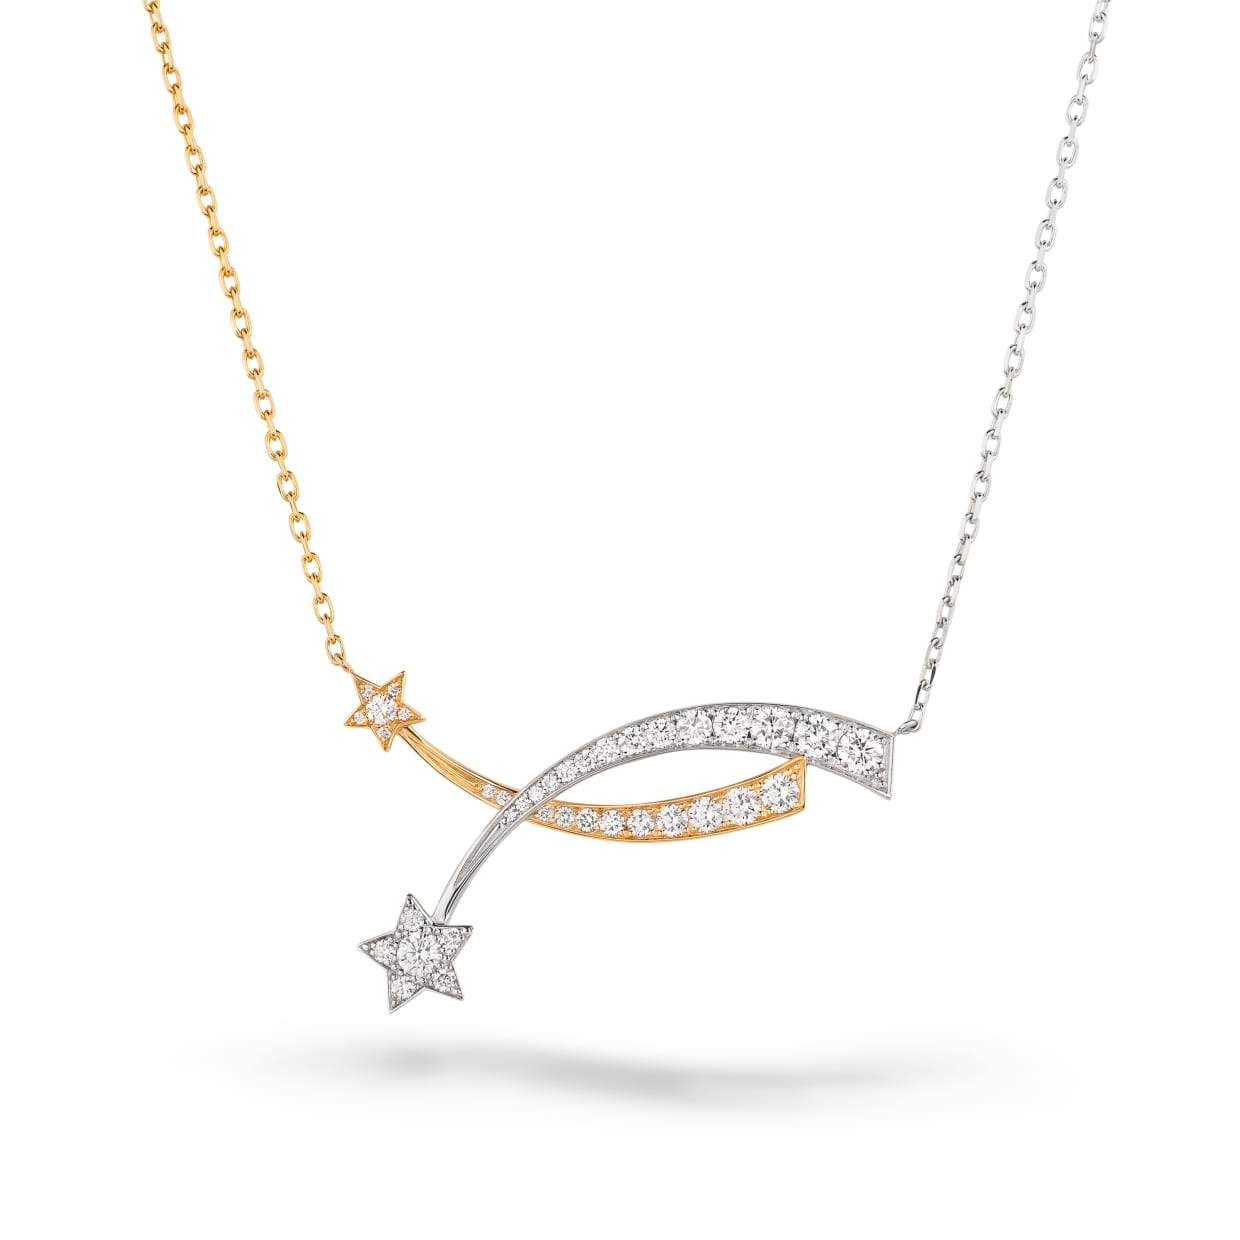 Wholesale OEM necklace in 18K white and yellow gold OEM/ODM Jewelry, diamonds design your jewelry